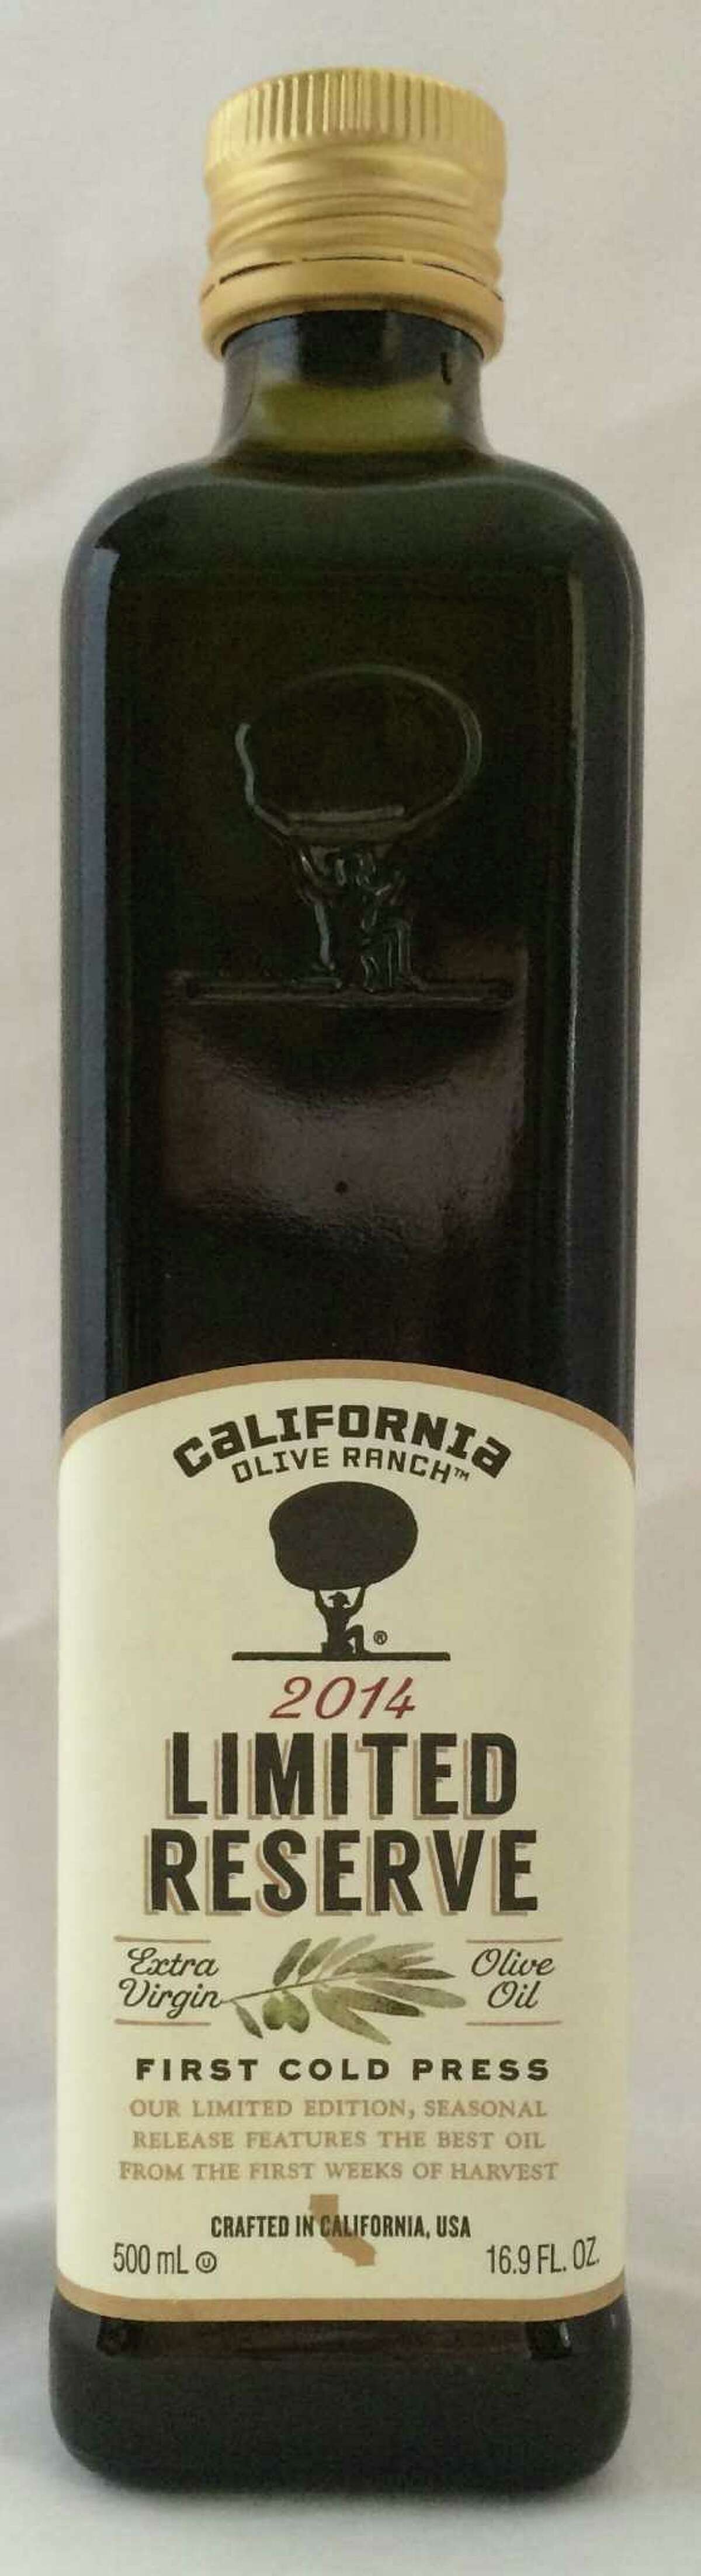 California Olive Ranch 2014 Limited Reserve olio nuovo